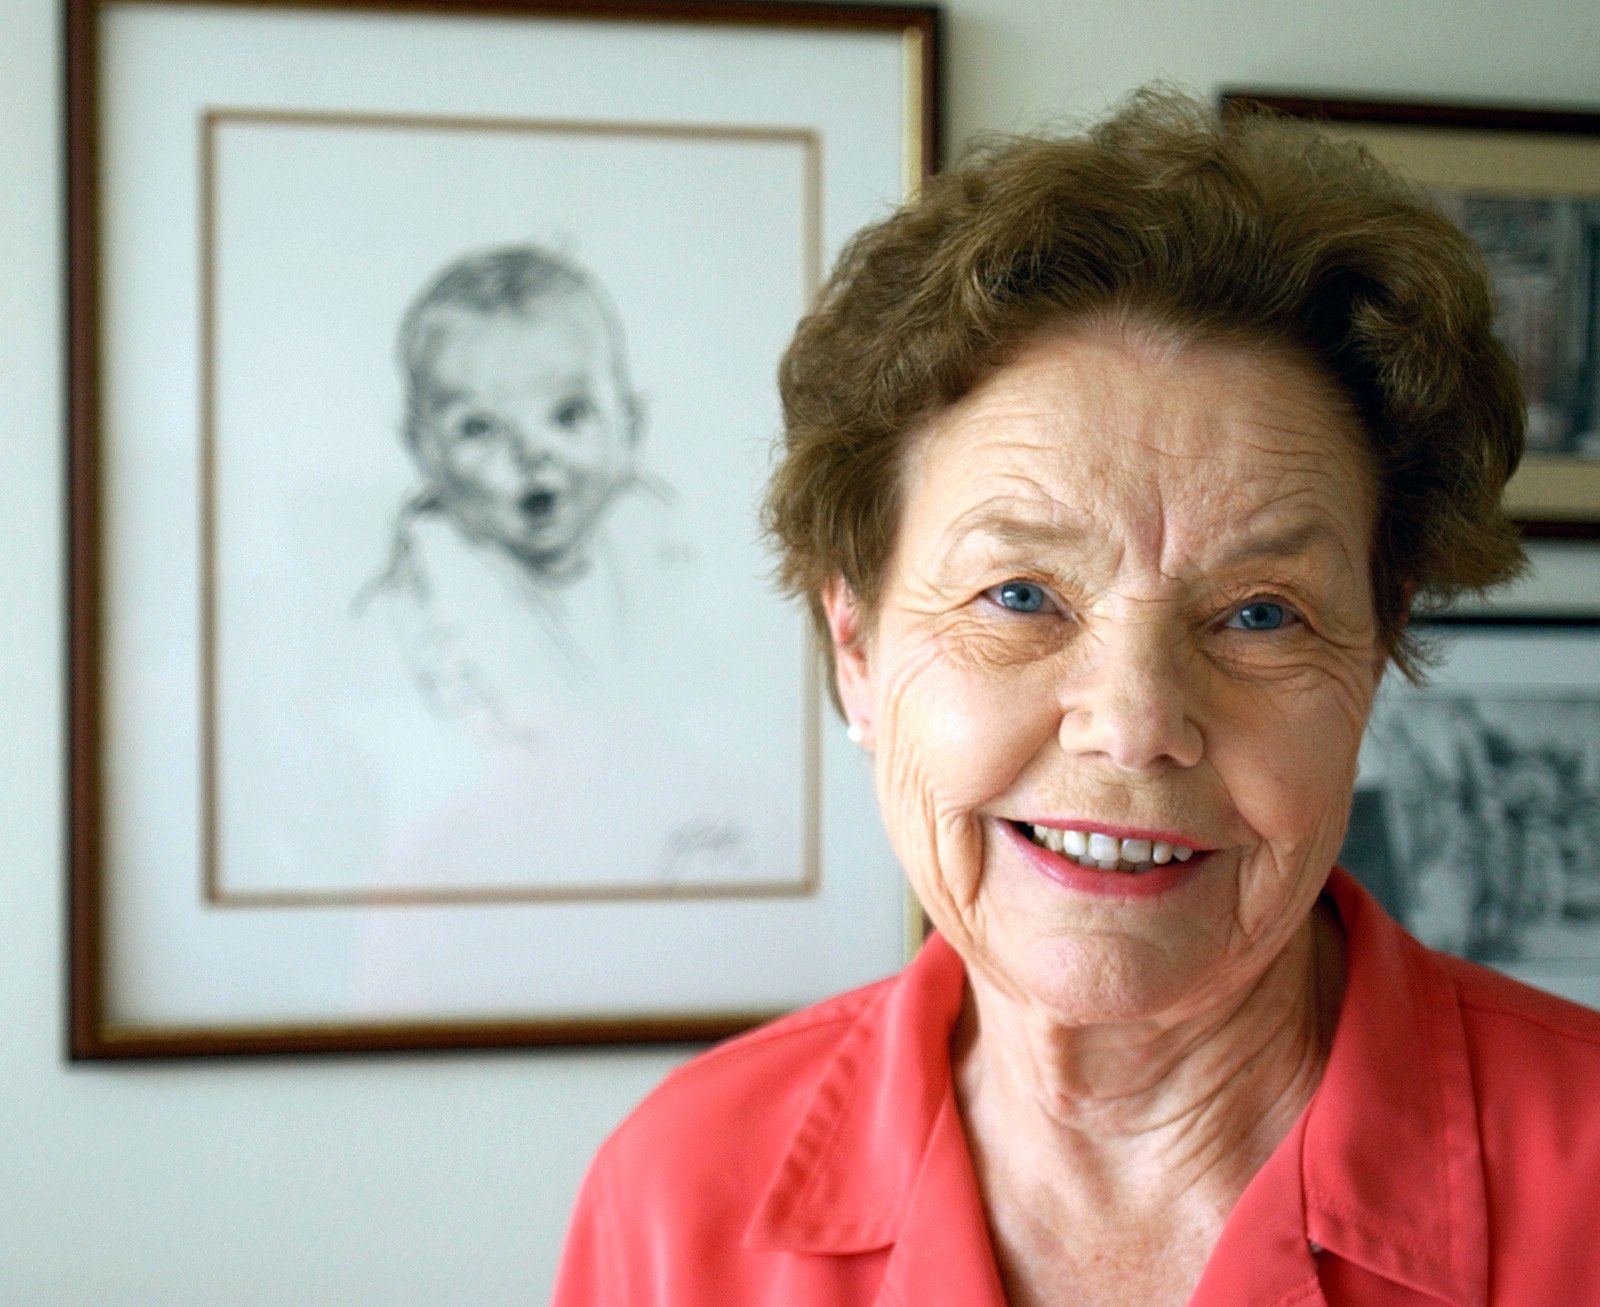 Famous for her face, the Gerber baby wanted to be remembered as a great  teacher